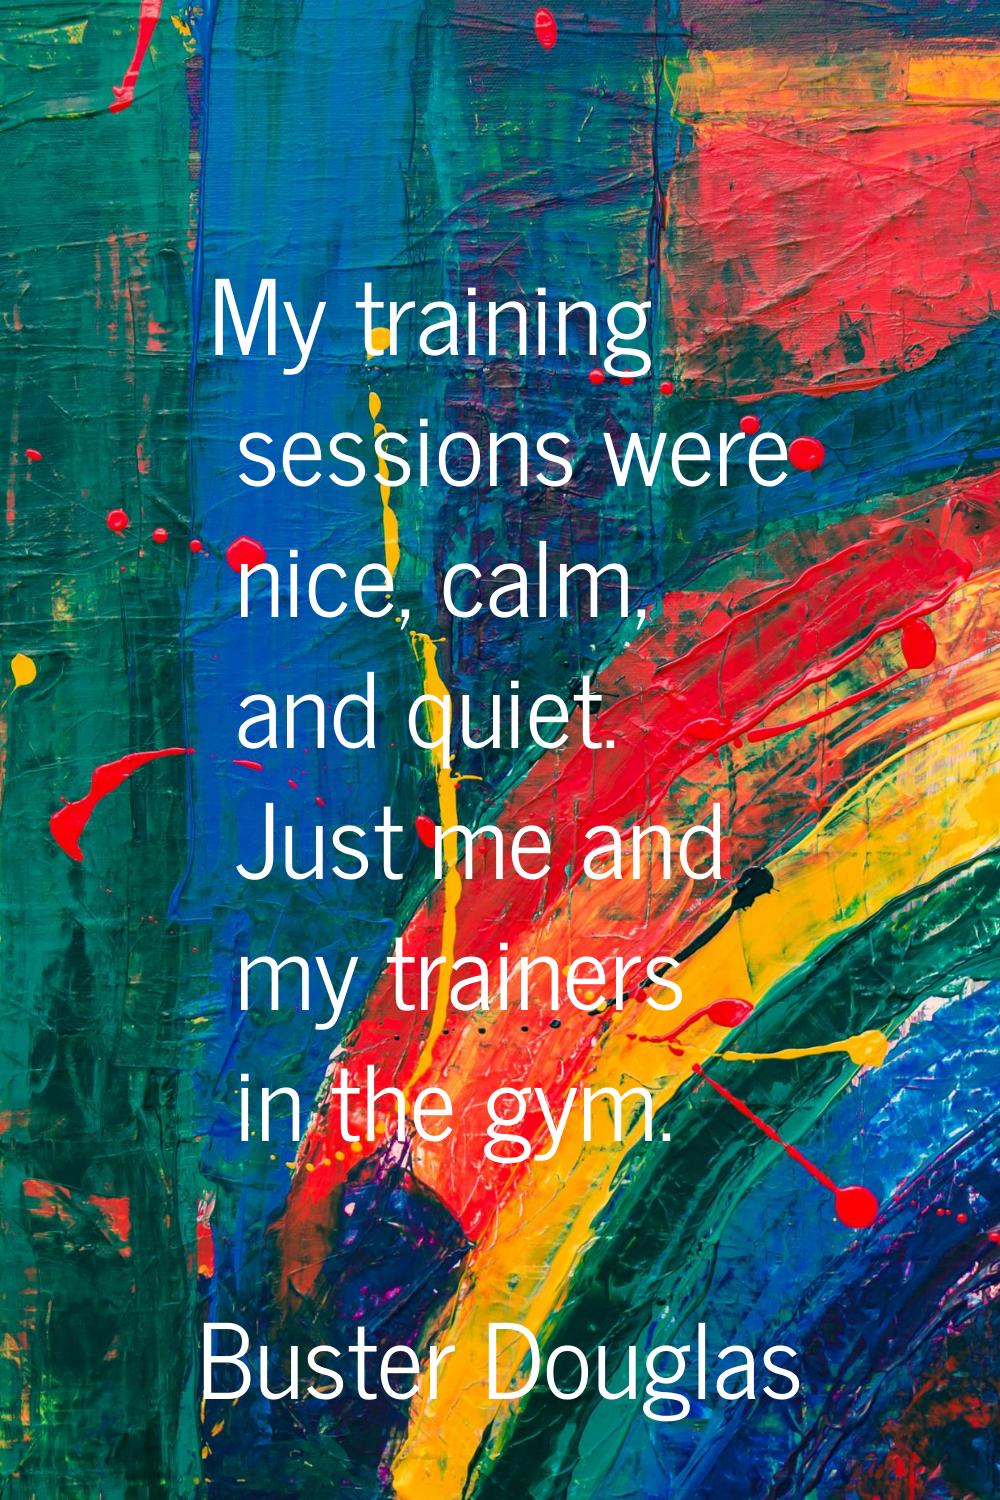 My training sessions were nice, calm, and quiet. Just me and my trainers in the gym.